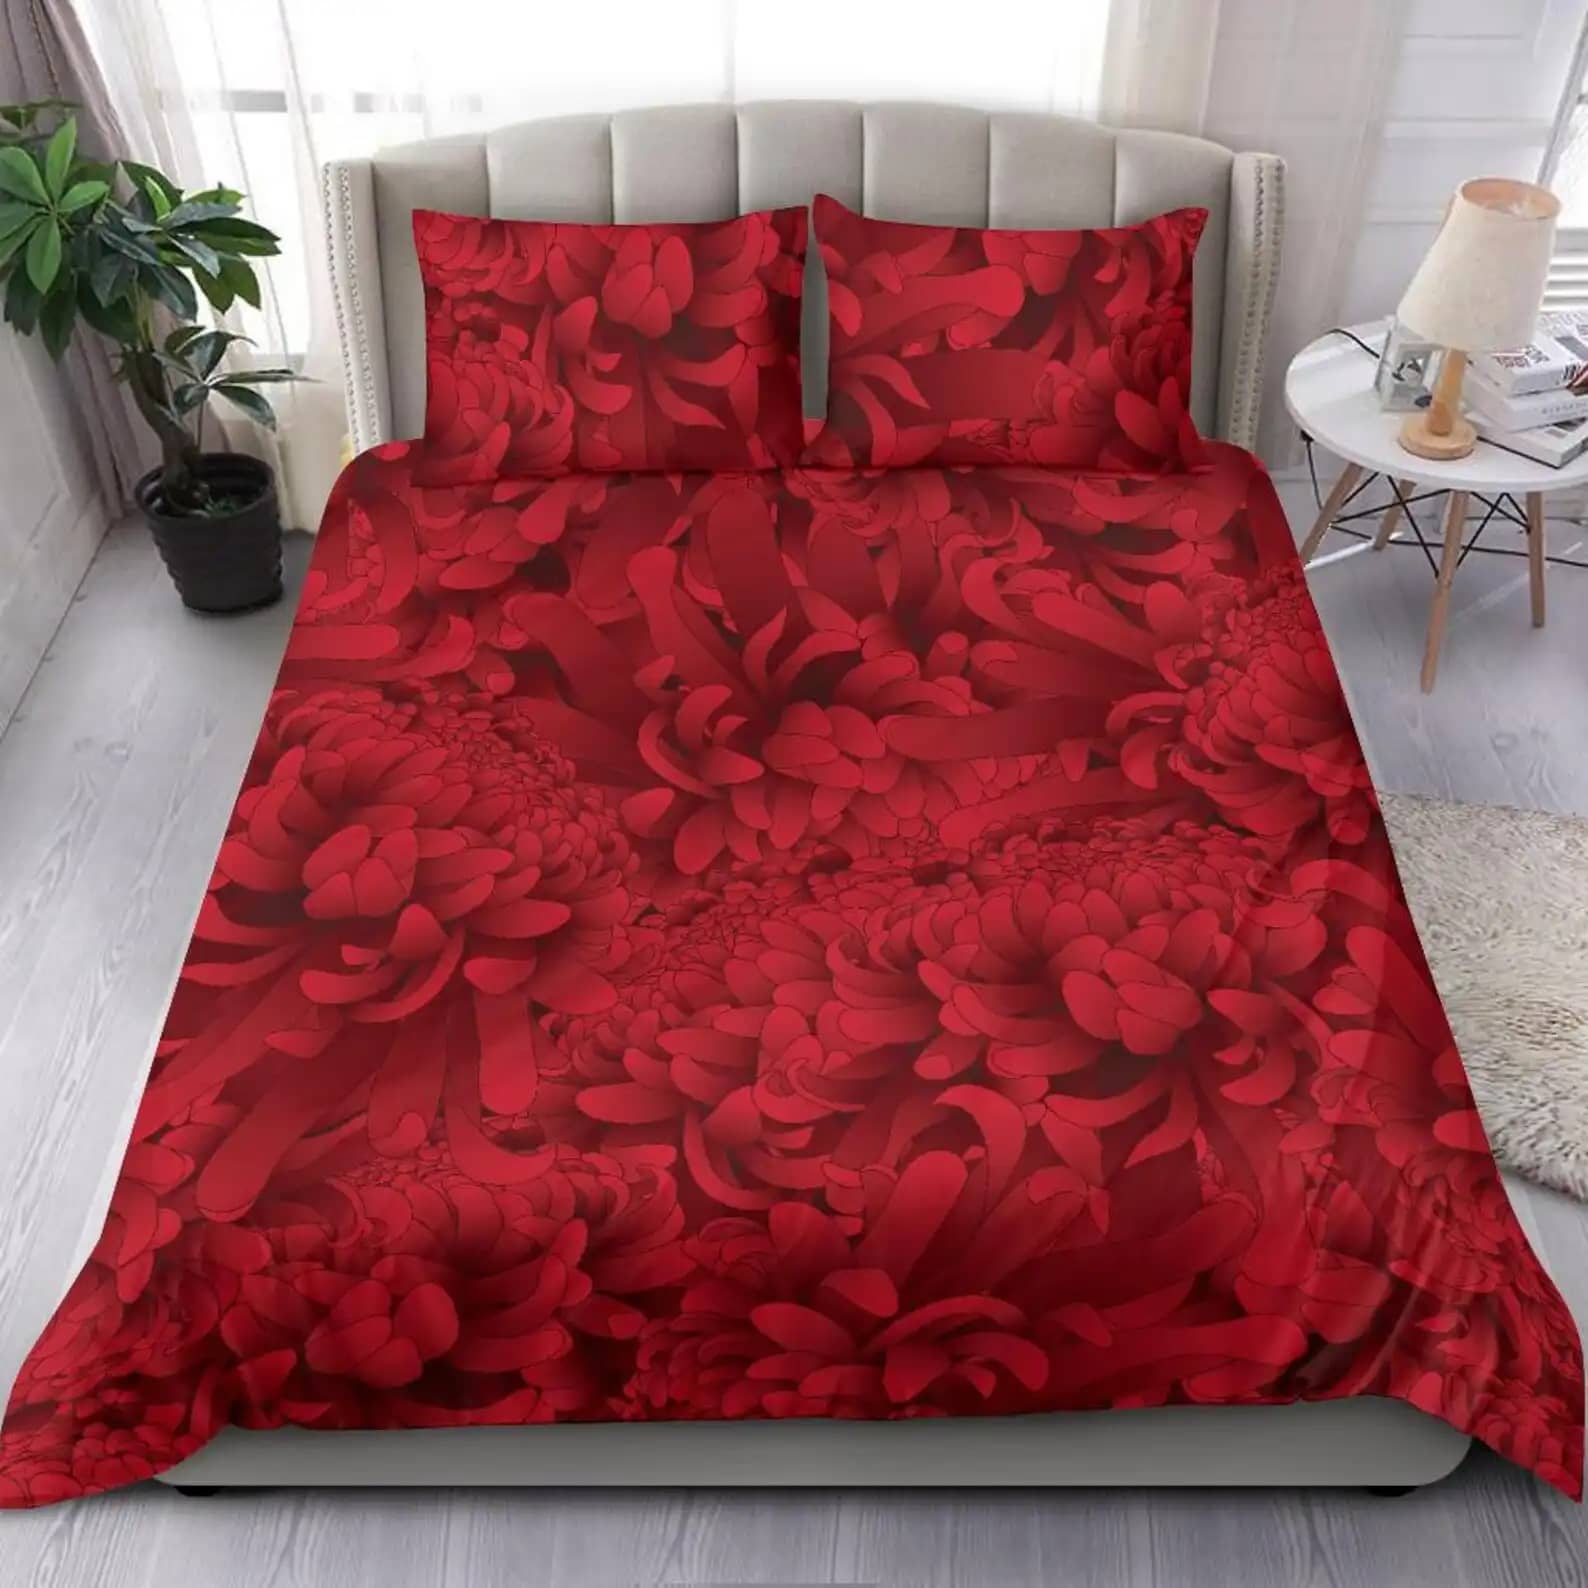 Fancy Chic Red Chrysanthemum Floral Quilt Bedding Sets